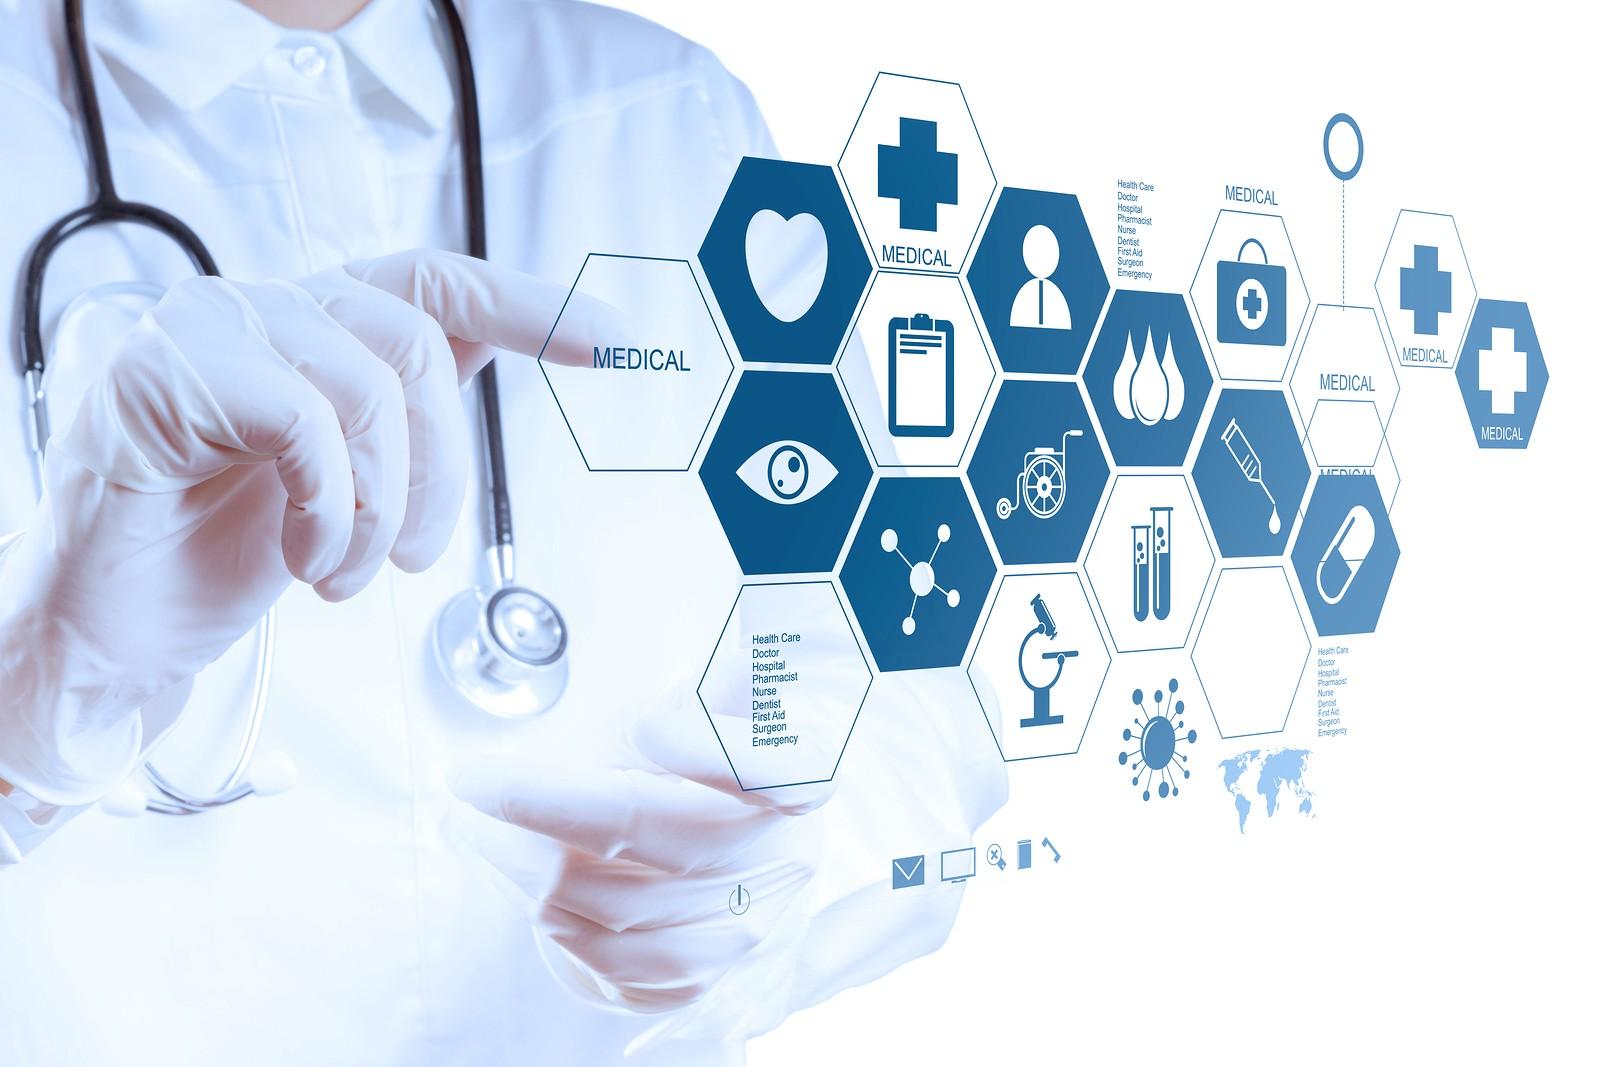 How can technology digitalize the medical world